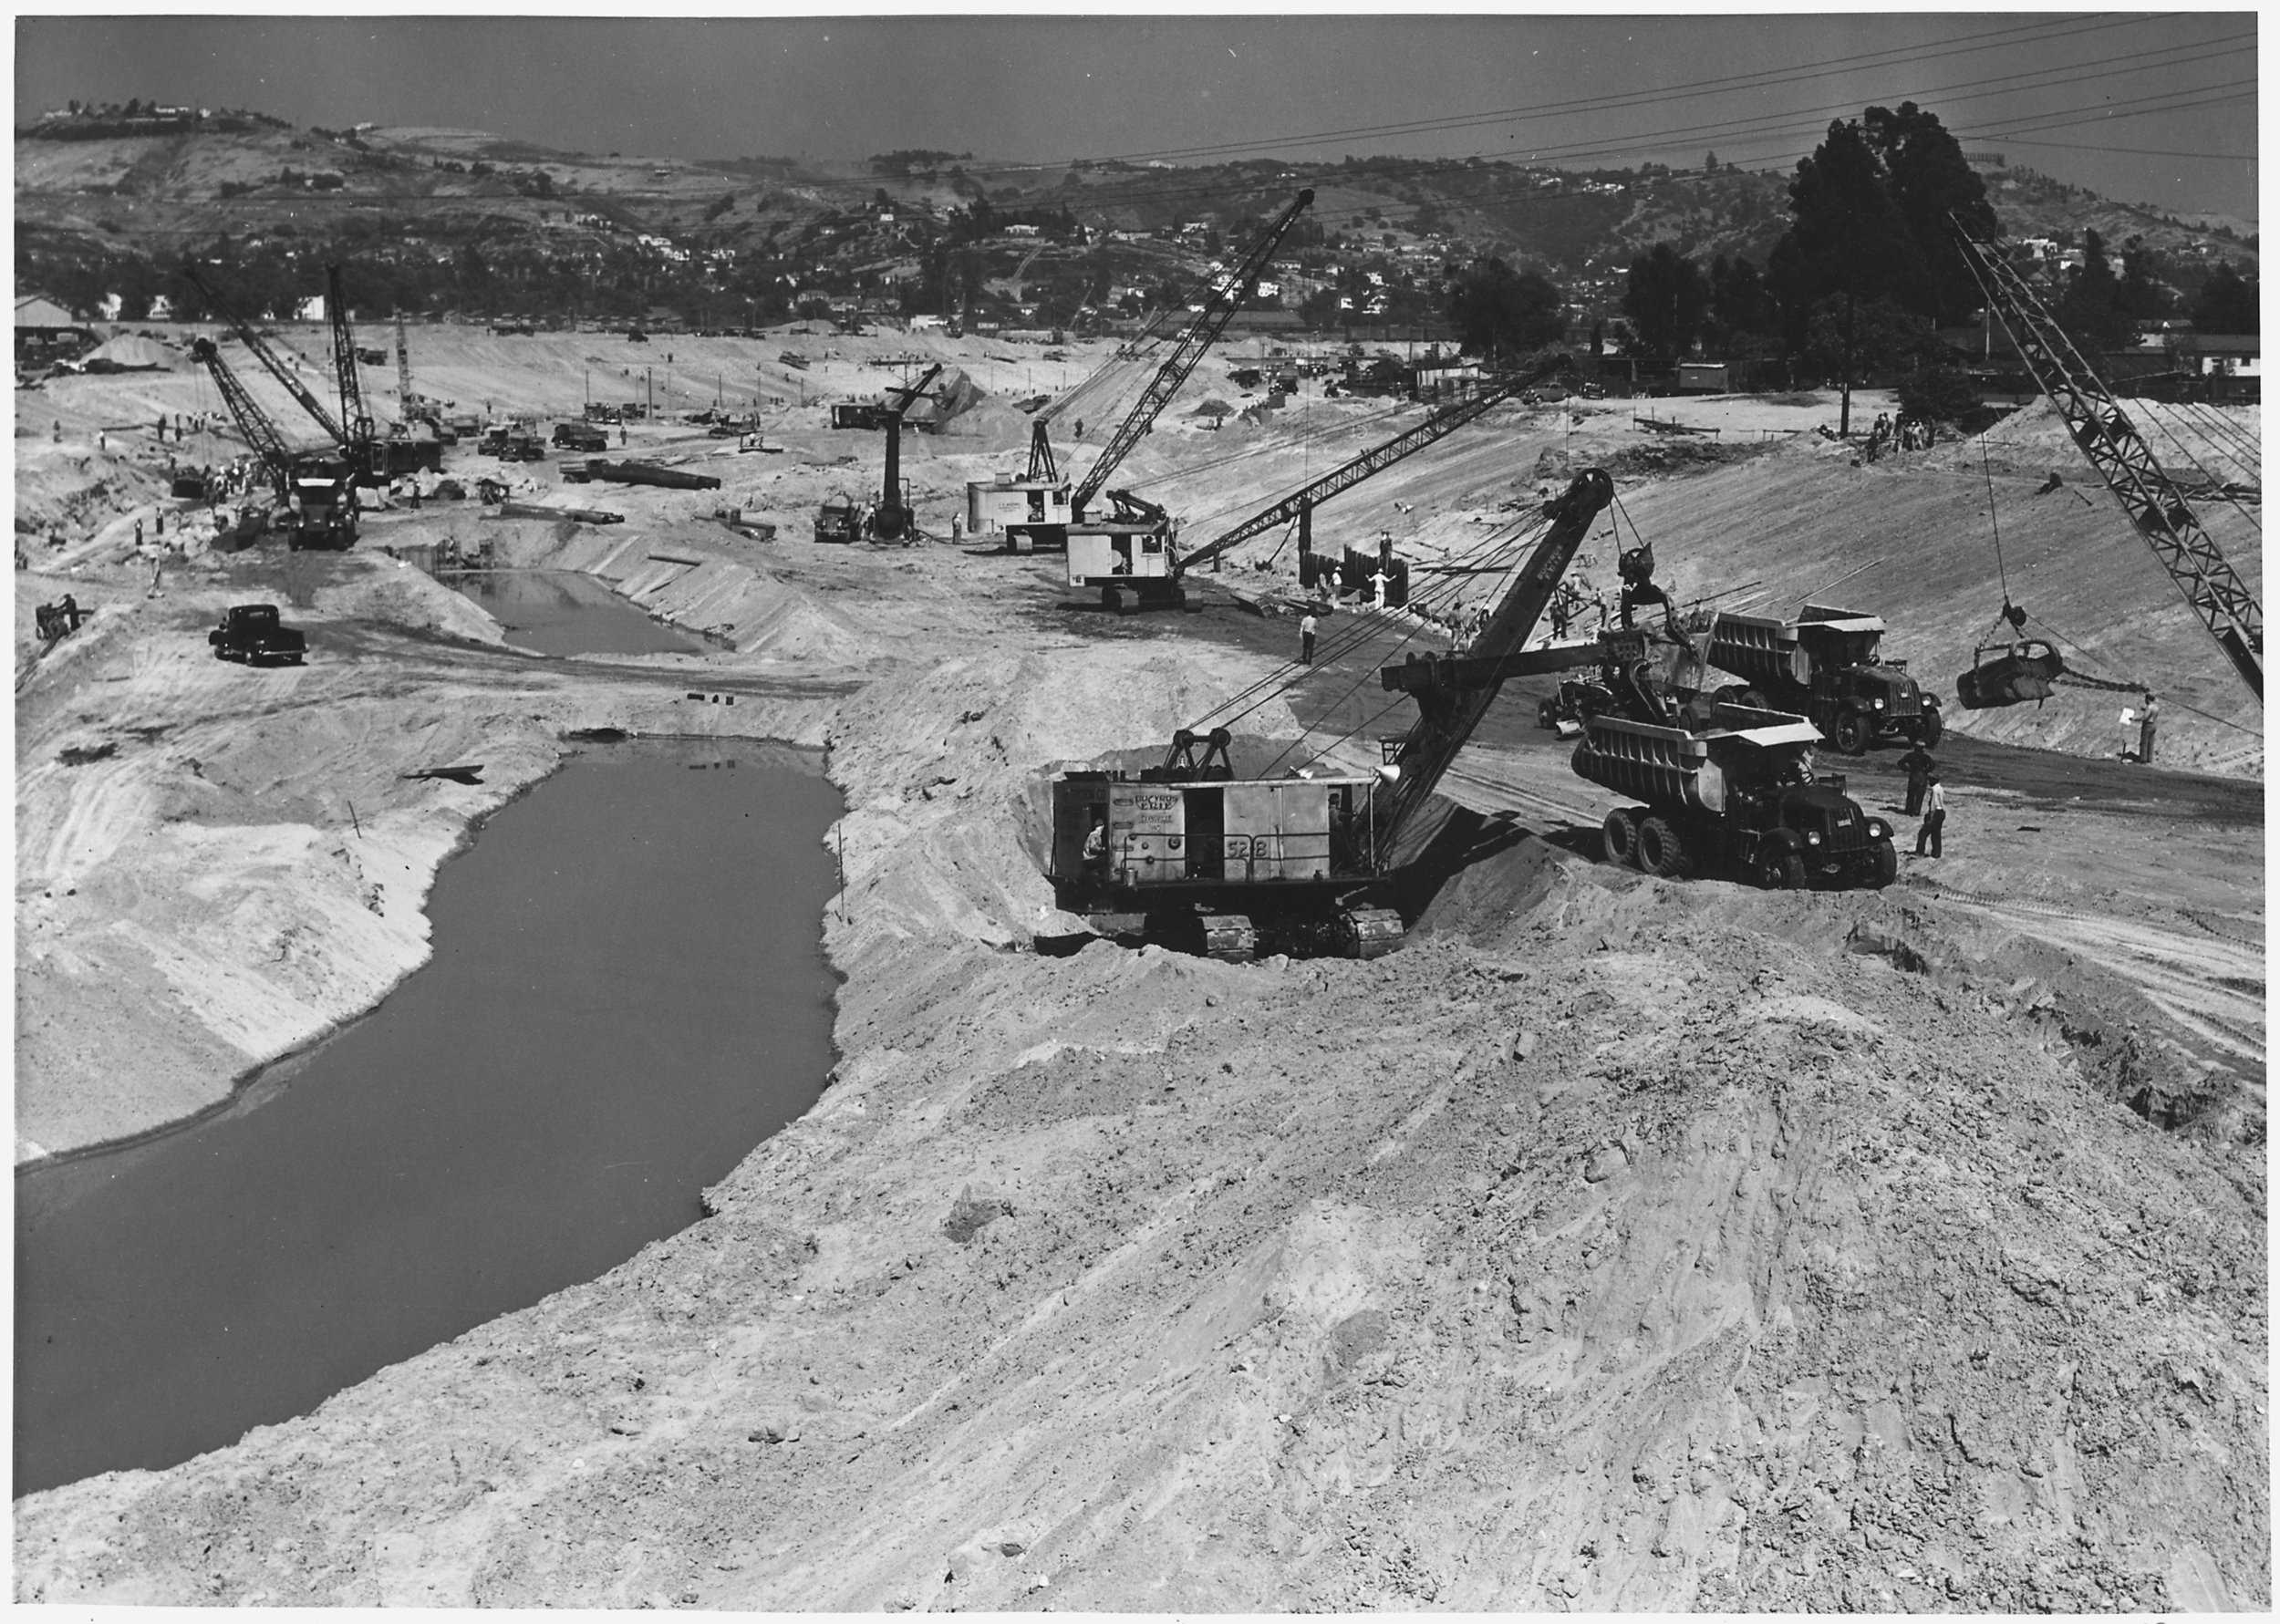 Los_Angeles_District_-_Los_Angeles_River_Subproject_No._129_-_E.R.A._and_Regular_Funds_-_Hired_Labor_-_Taken_June_13..._-_NARA_-_295359 copy.jpg